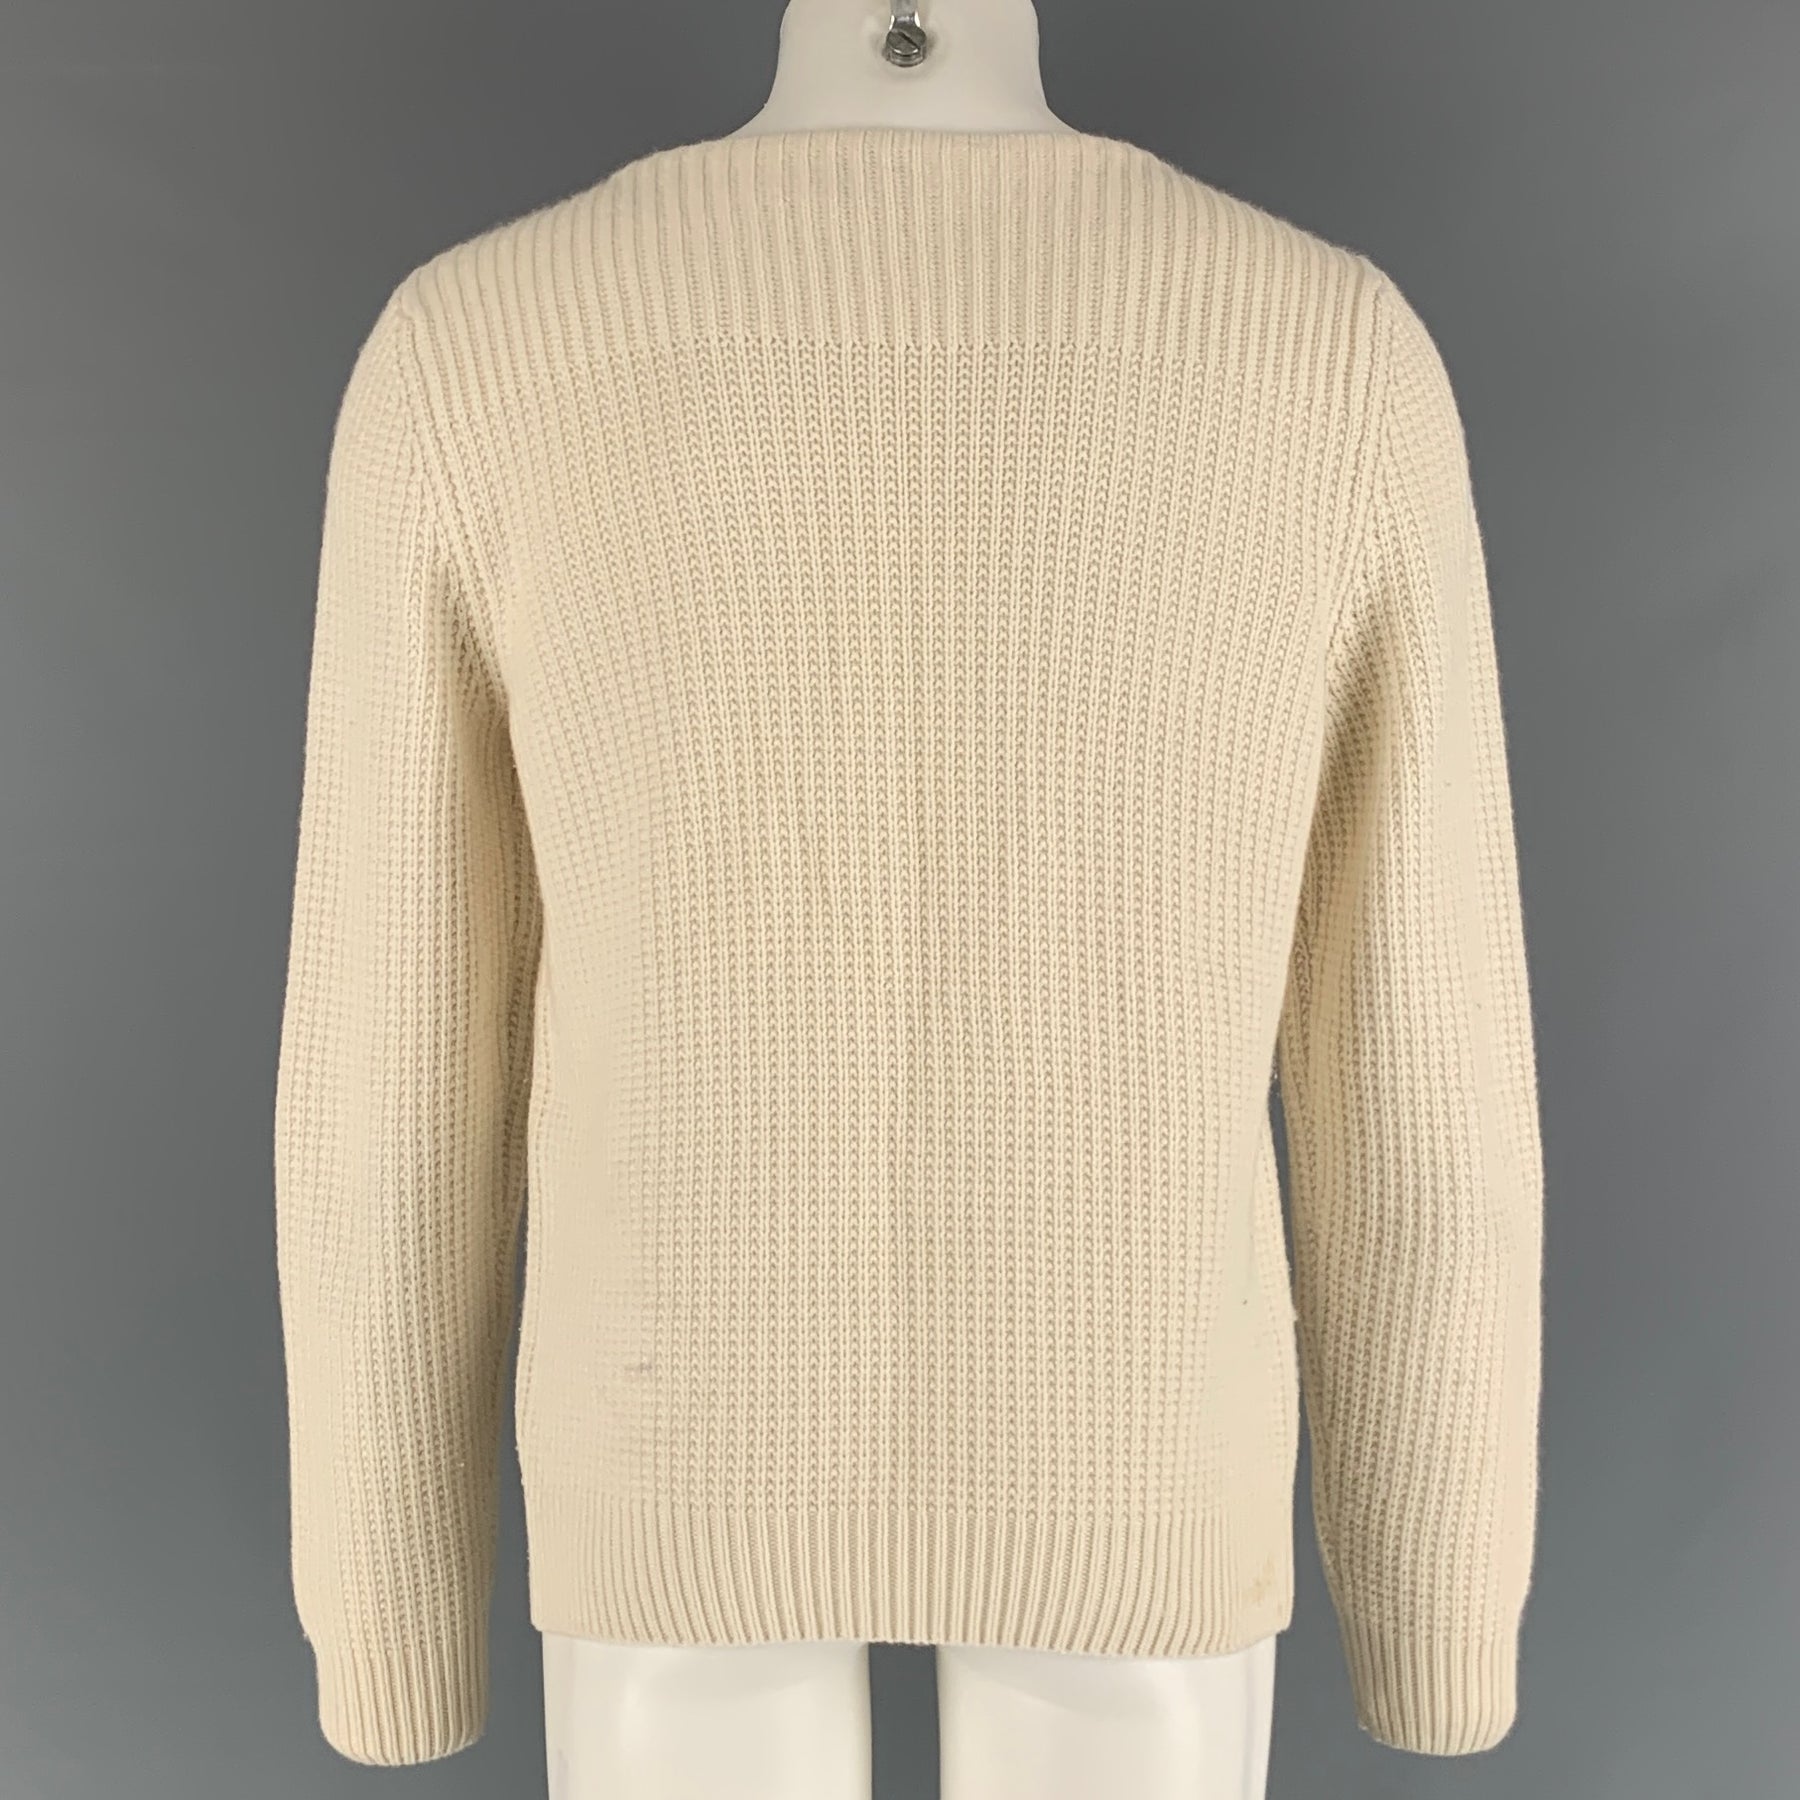 HERMES Size S Cream Knitted Cashmere Cotton Boat Neck Sweater